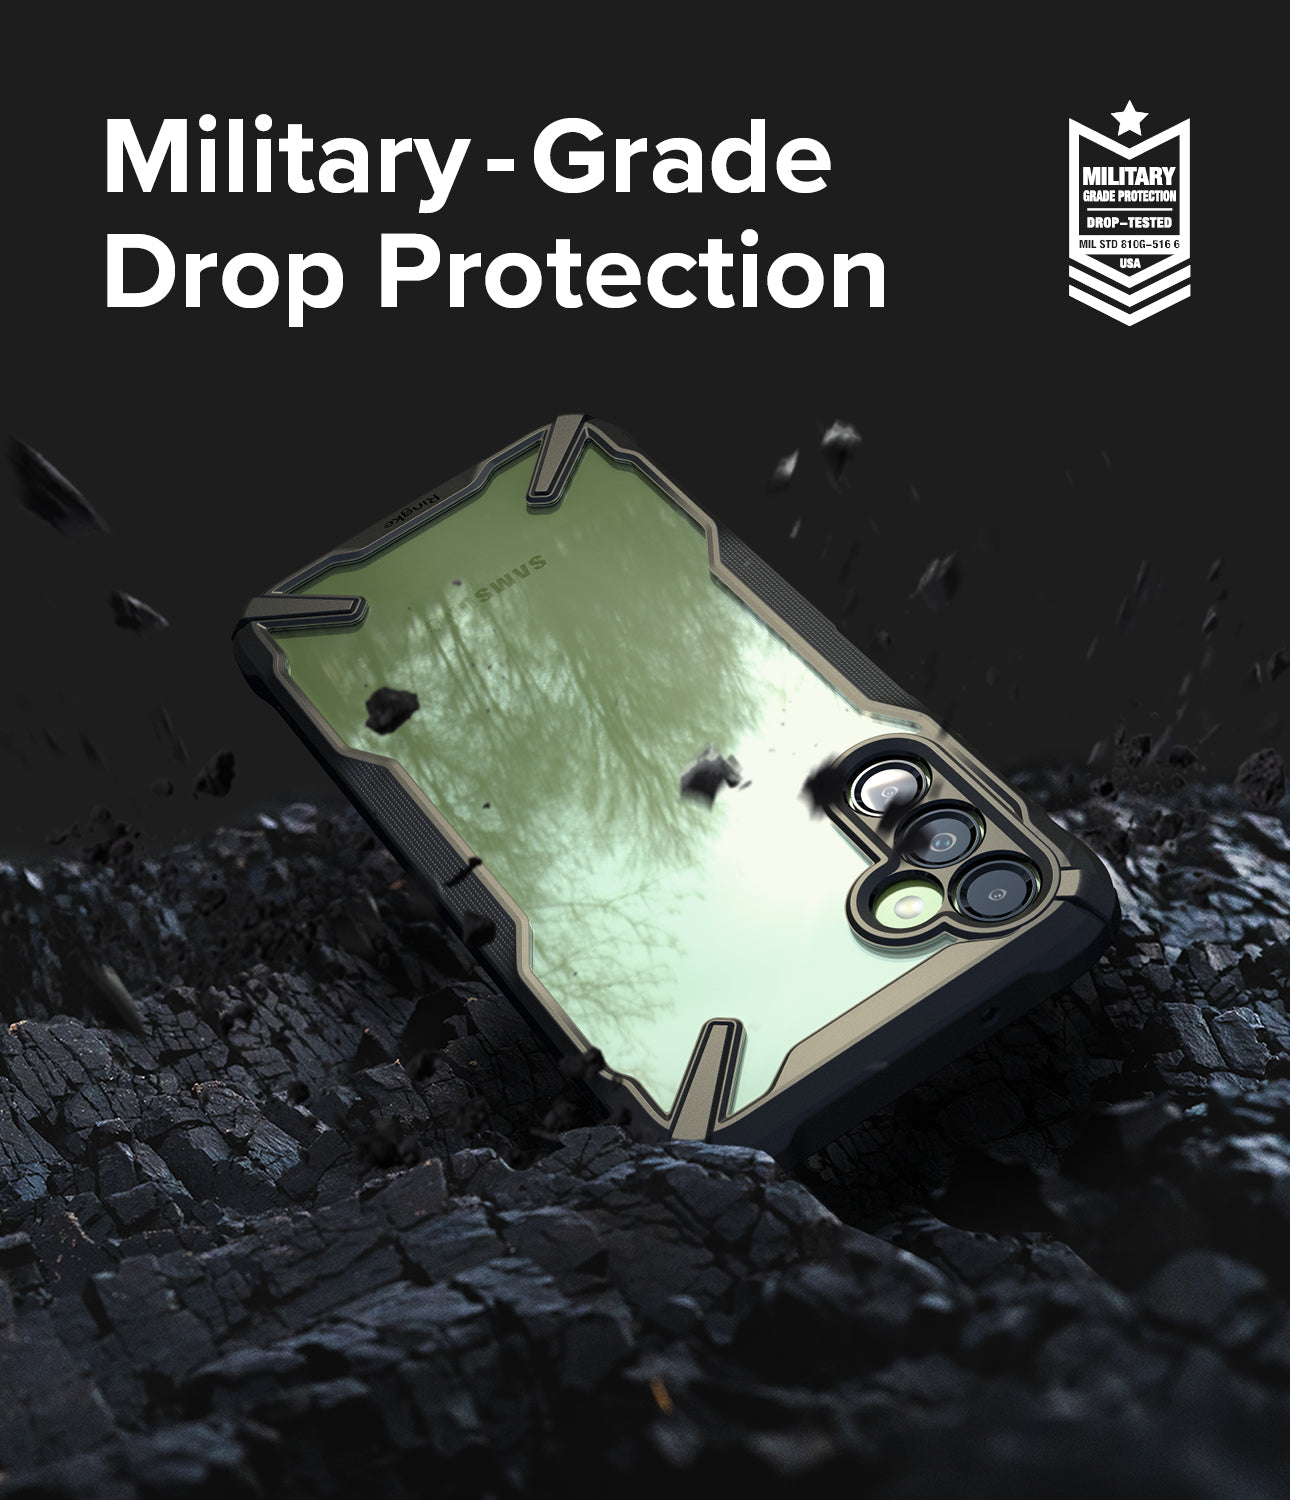 Military - Grade Drop Protection